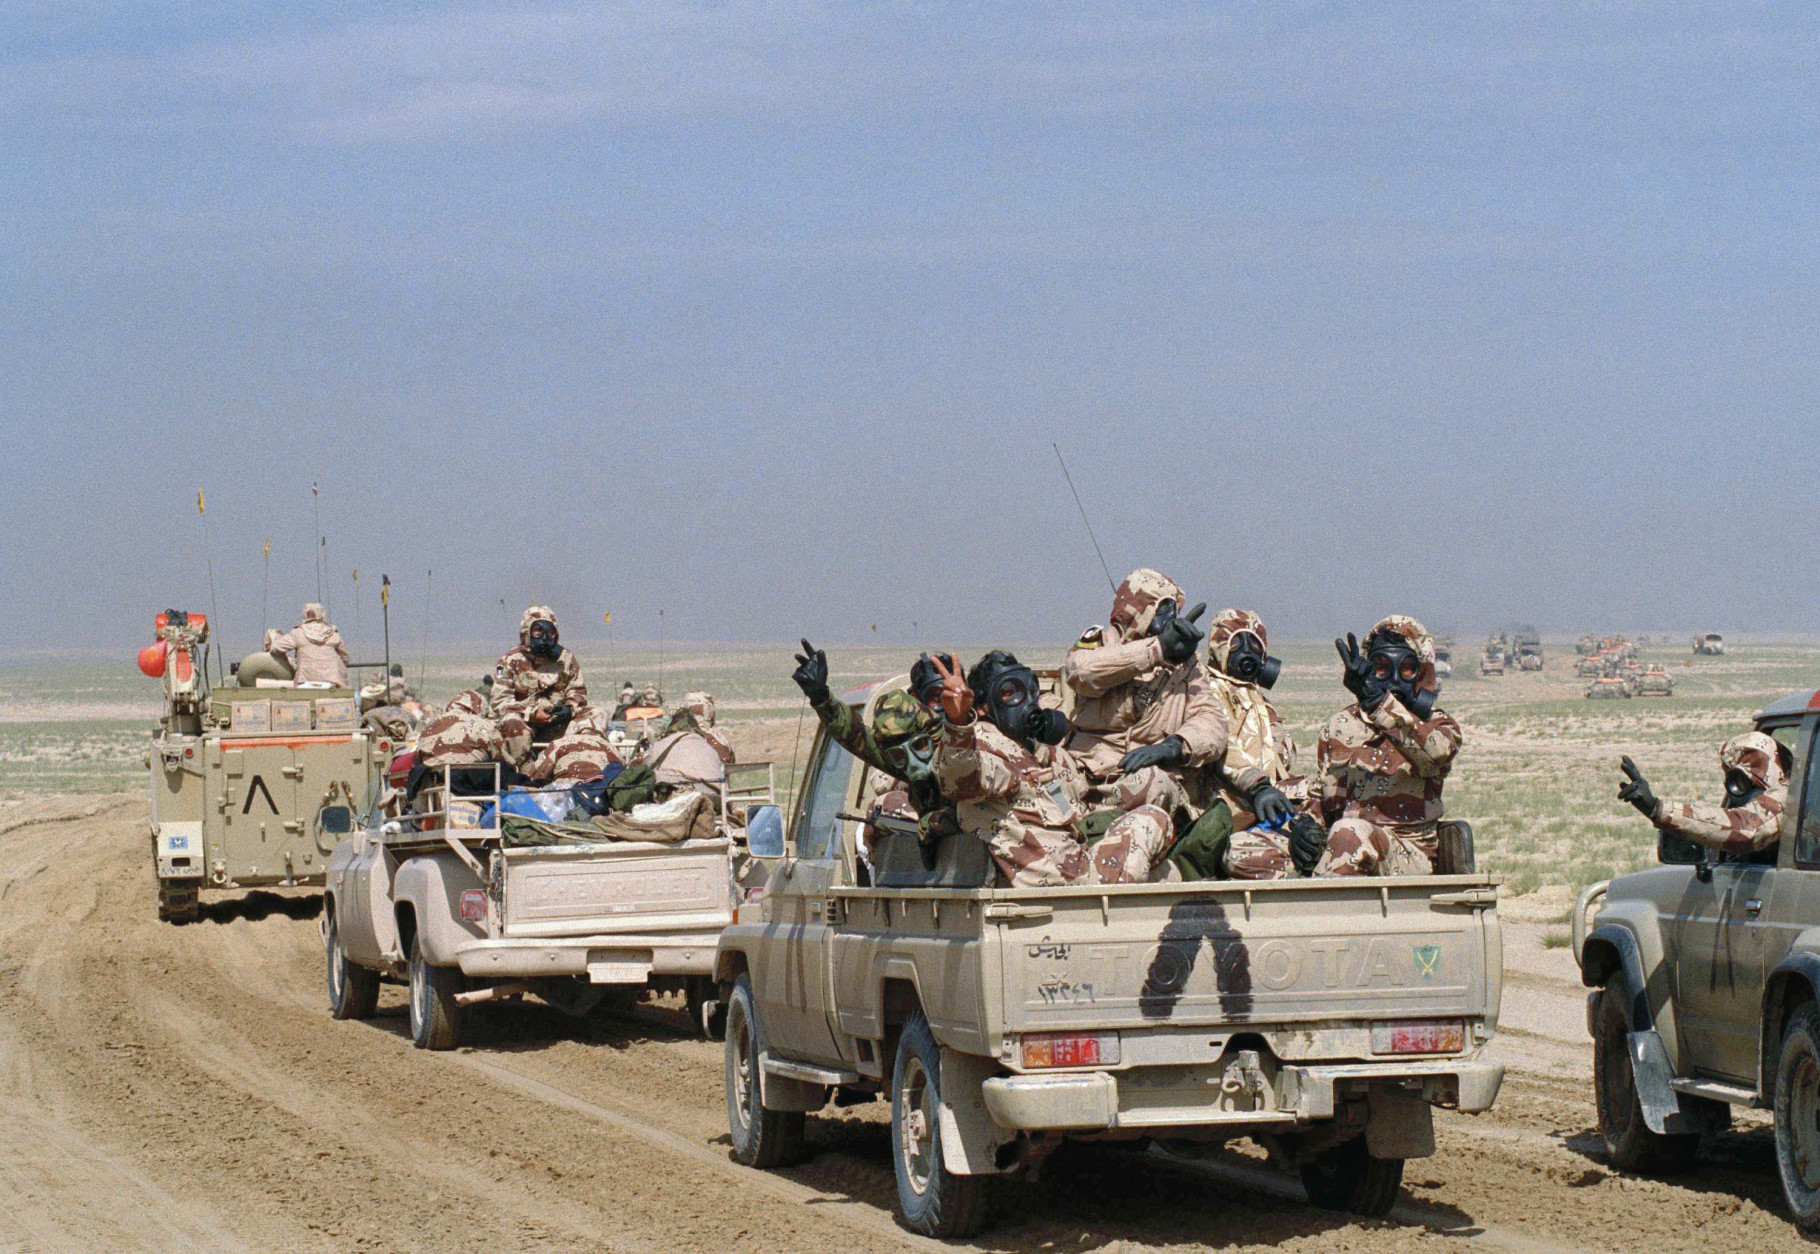 Kuwaiti troops wearing gas masks and protective suits as they roll through southern Kuwait in an armed motor convoy, Sunday, Feb. 24, 1991, the first full day of ground conflict in Operation Desert Storm. Allied troops encountered resistance in some areas, but no use of gas weapons was reported. Inverted "V" painted on vehicles is the allied recognition symbol. (AP Photo/Laurent Rebours)